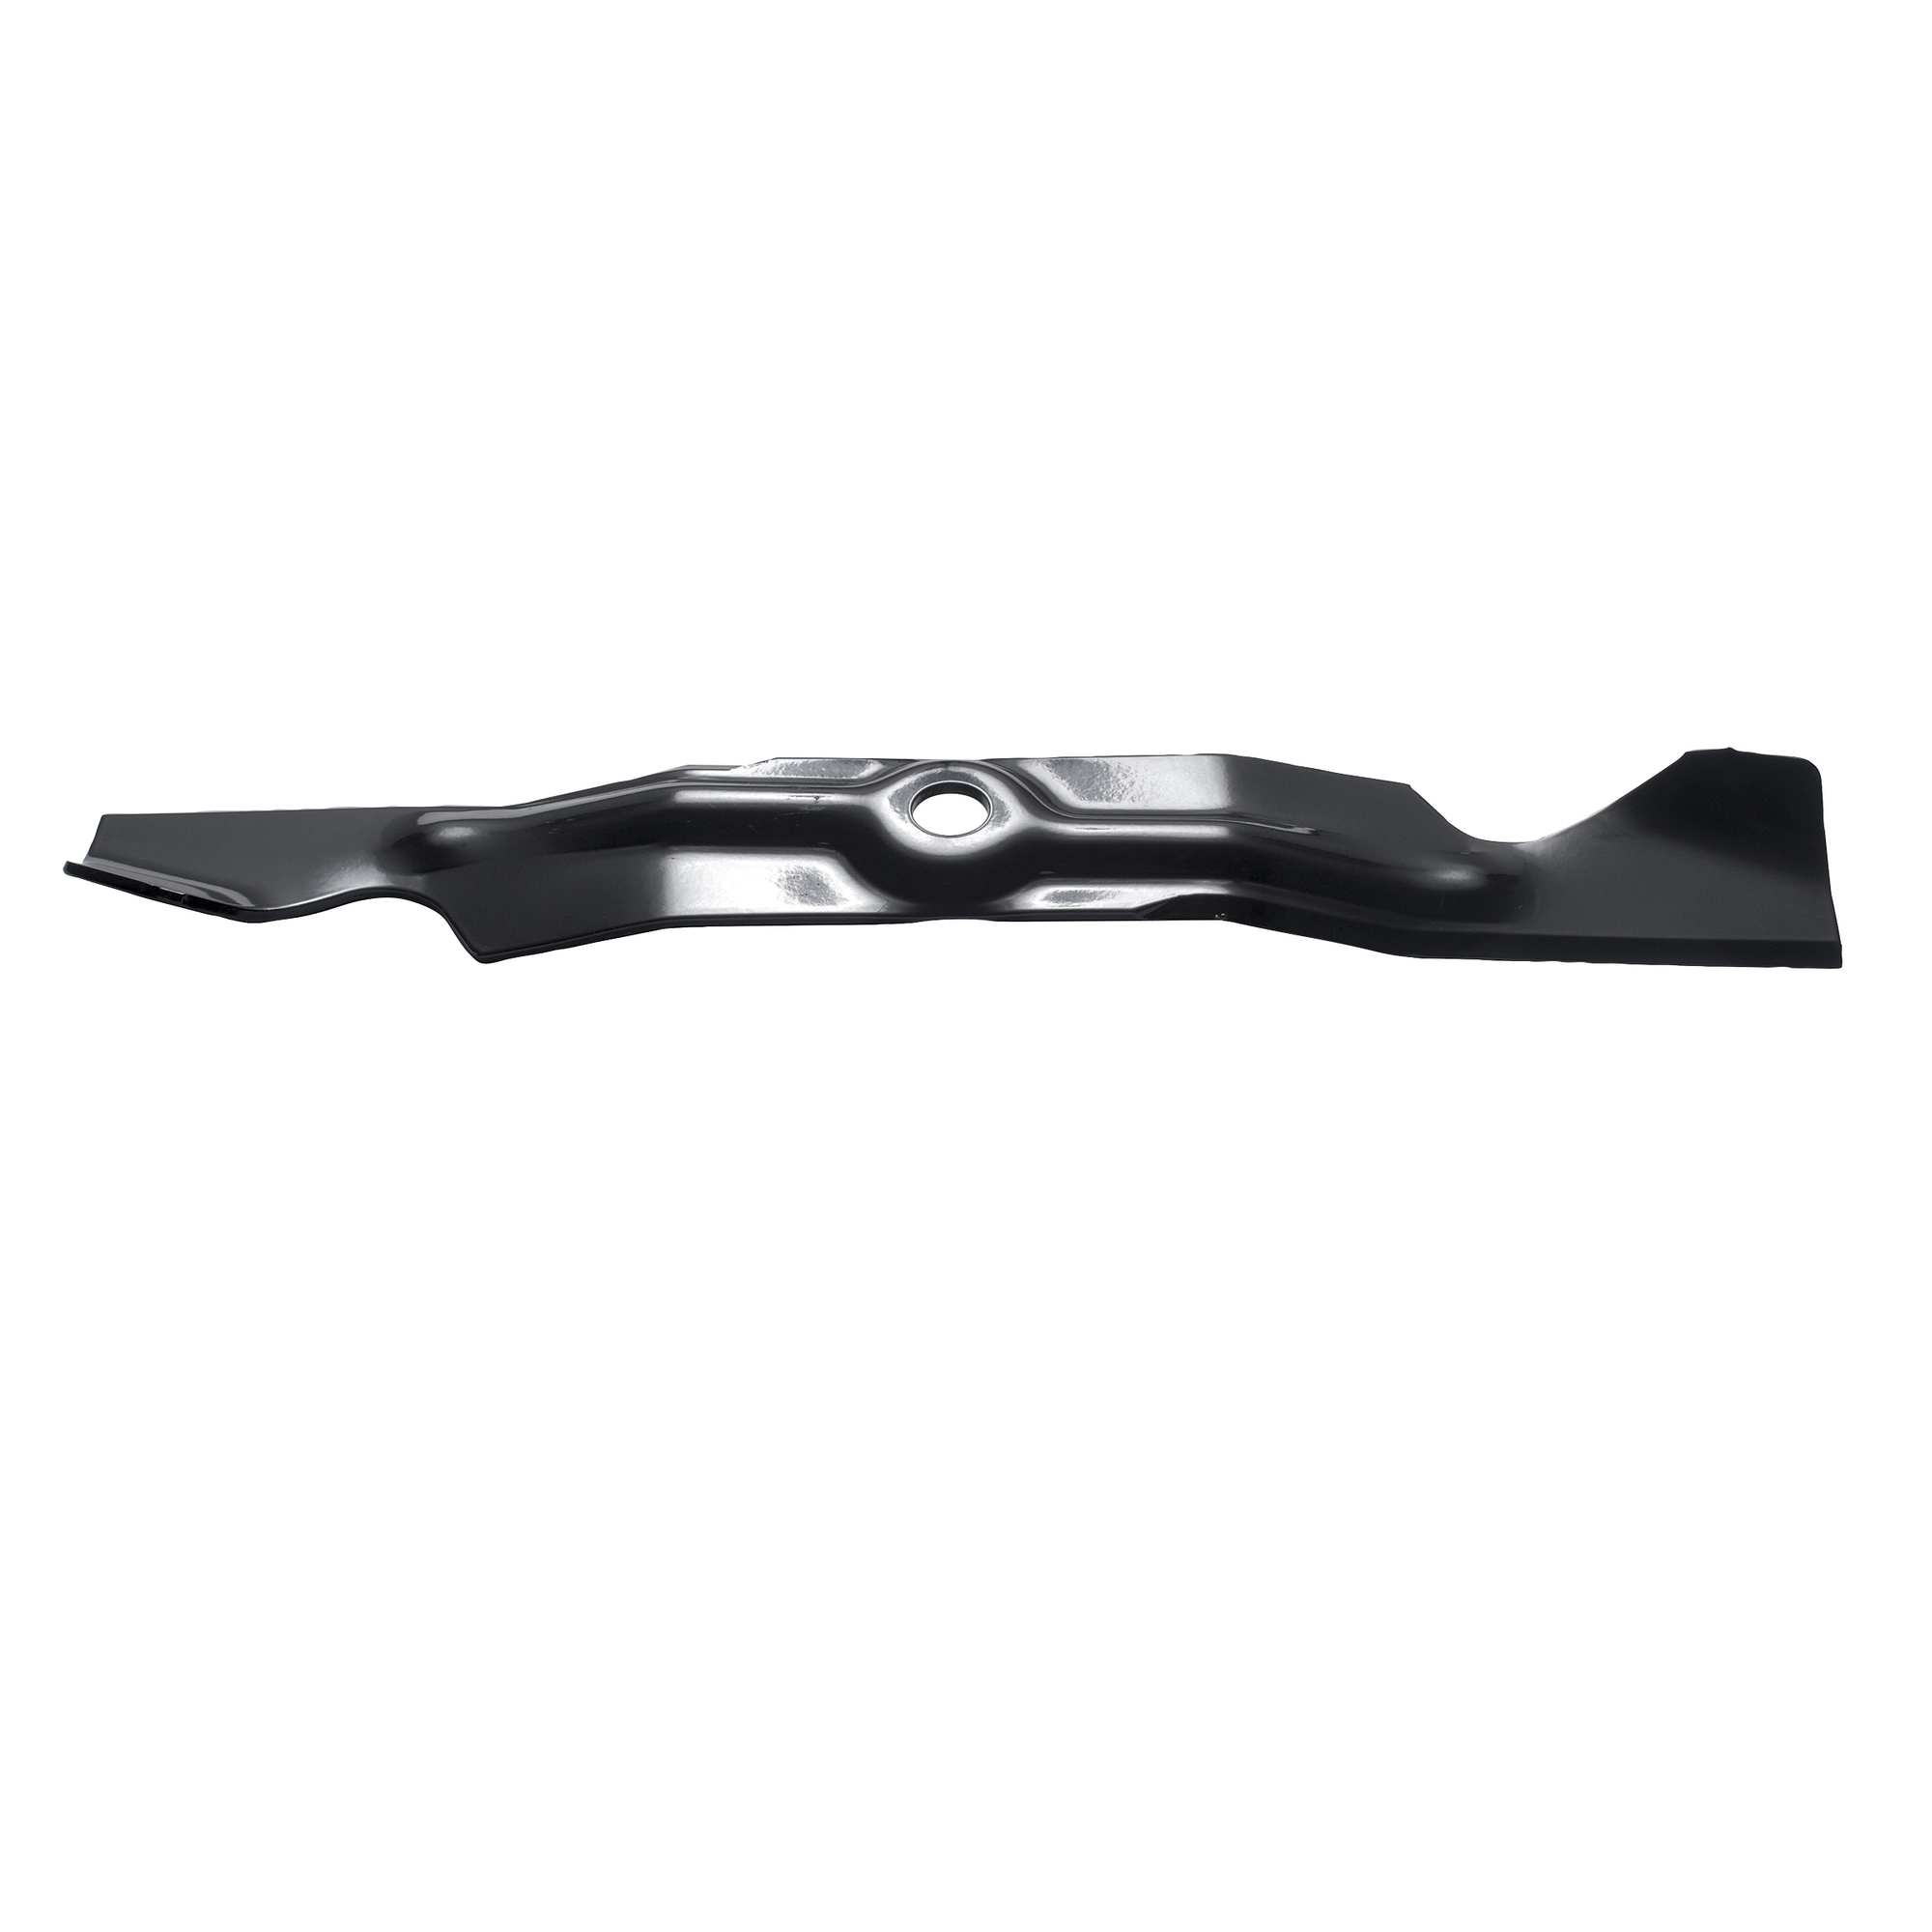 Oregon, Replacement Lawn Mower Blade, Length 17.875 in, Model 98-087